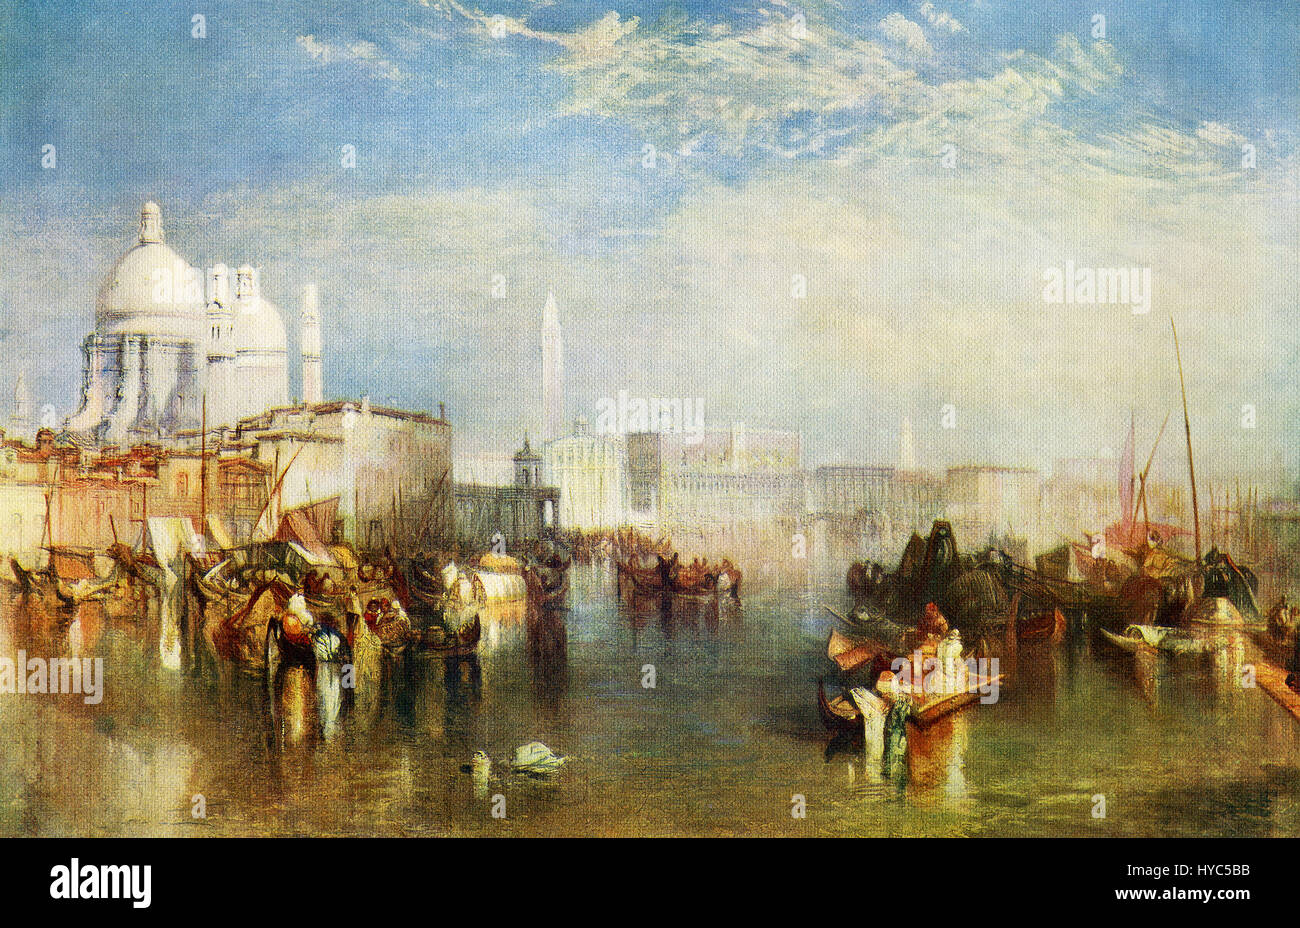 This painting, titled Venice, is by the English Romanticist landscape artist J.M. W. Turner (1775-1851). Turner's ideal was light, and his ambition was to paint the sun. He loved painting the sea and water, especially if in the distance some beautiful city or country enabled him to play wih the effects of shadow and sunshine. Stock Photo